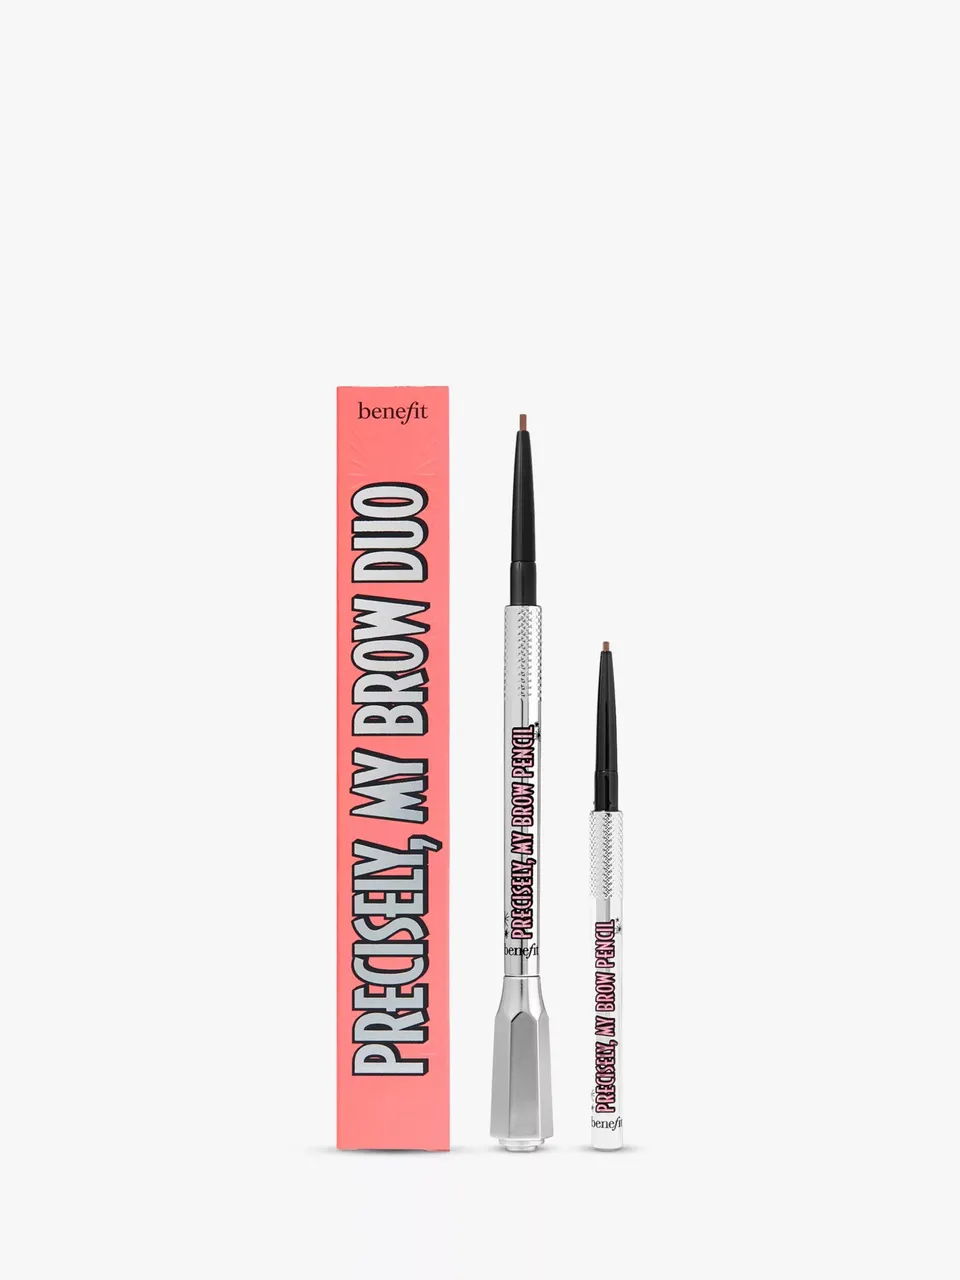 Benefit Precisely My Brow Duo Pencil Booster Set - Shade 3 - Unisex